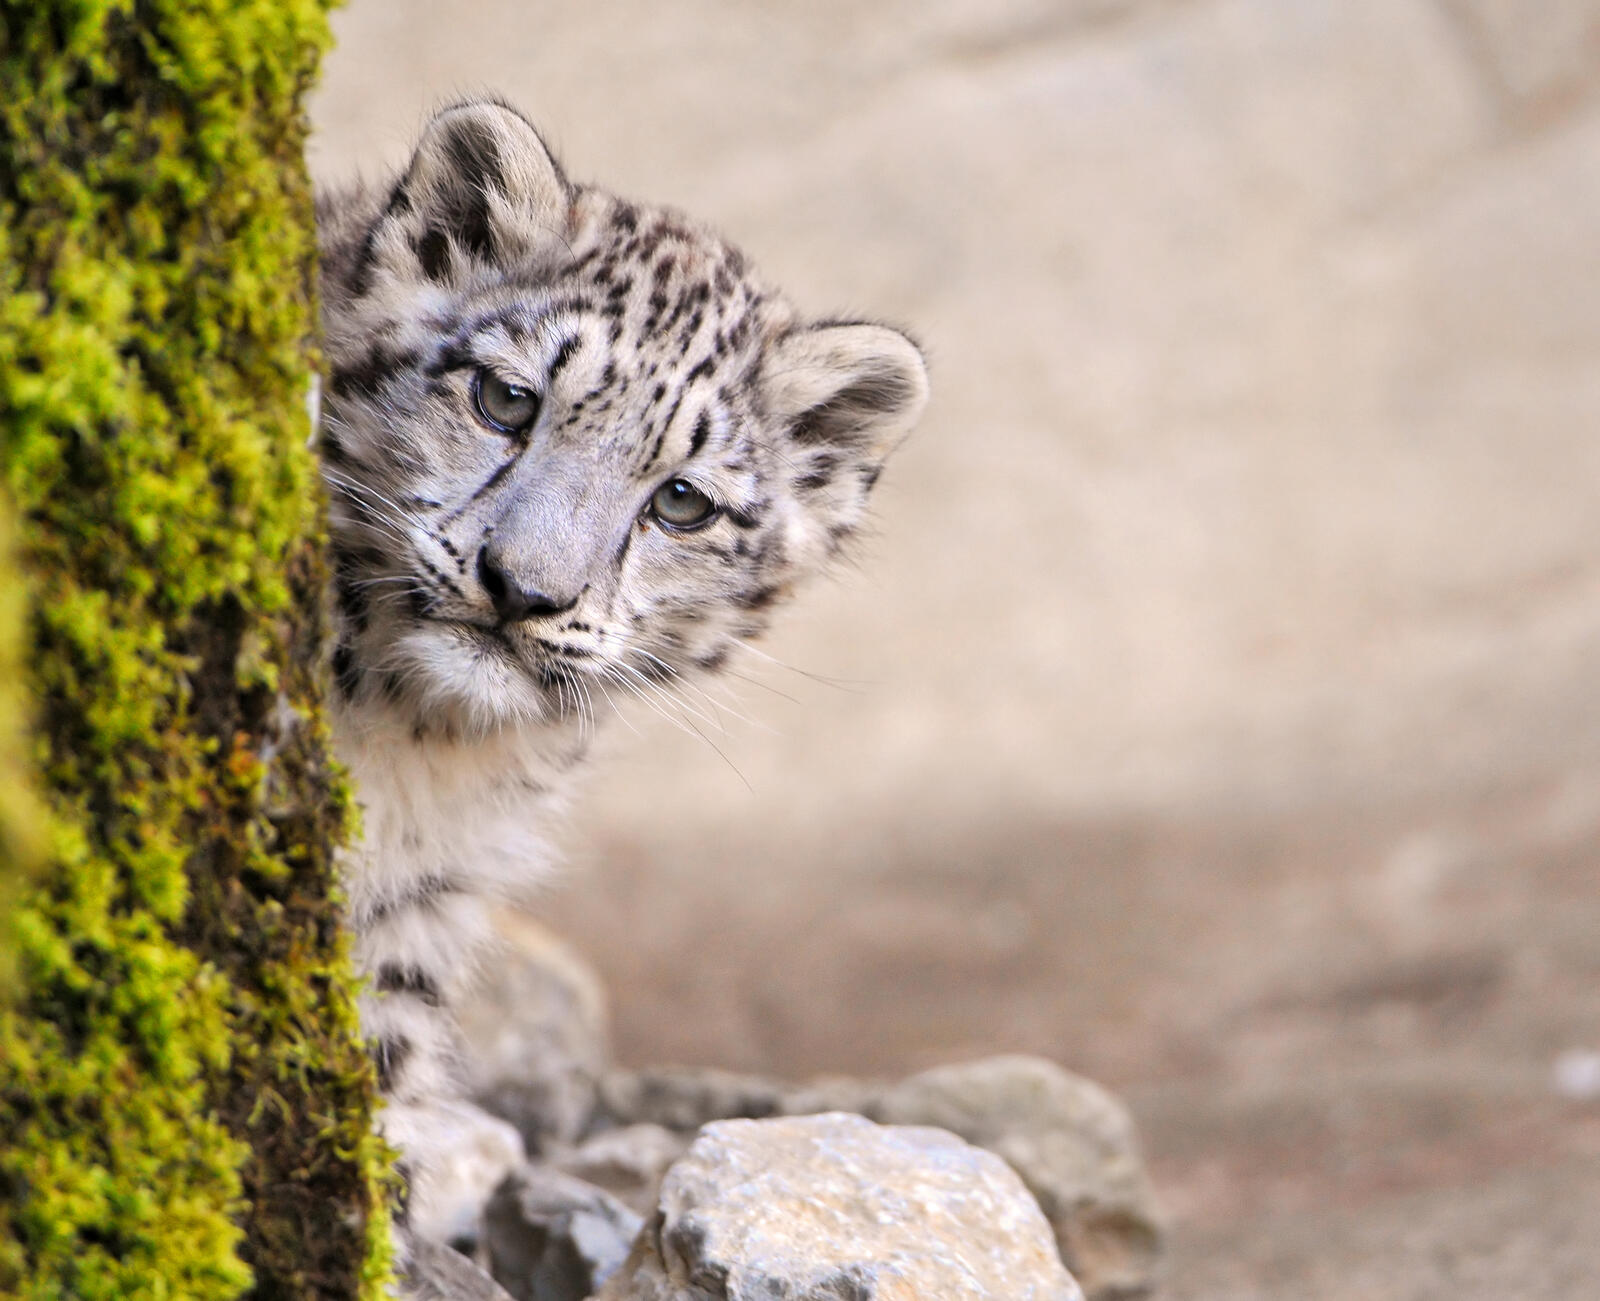 Wallpapers cats snow leopard animals on the desktop